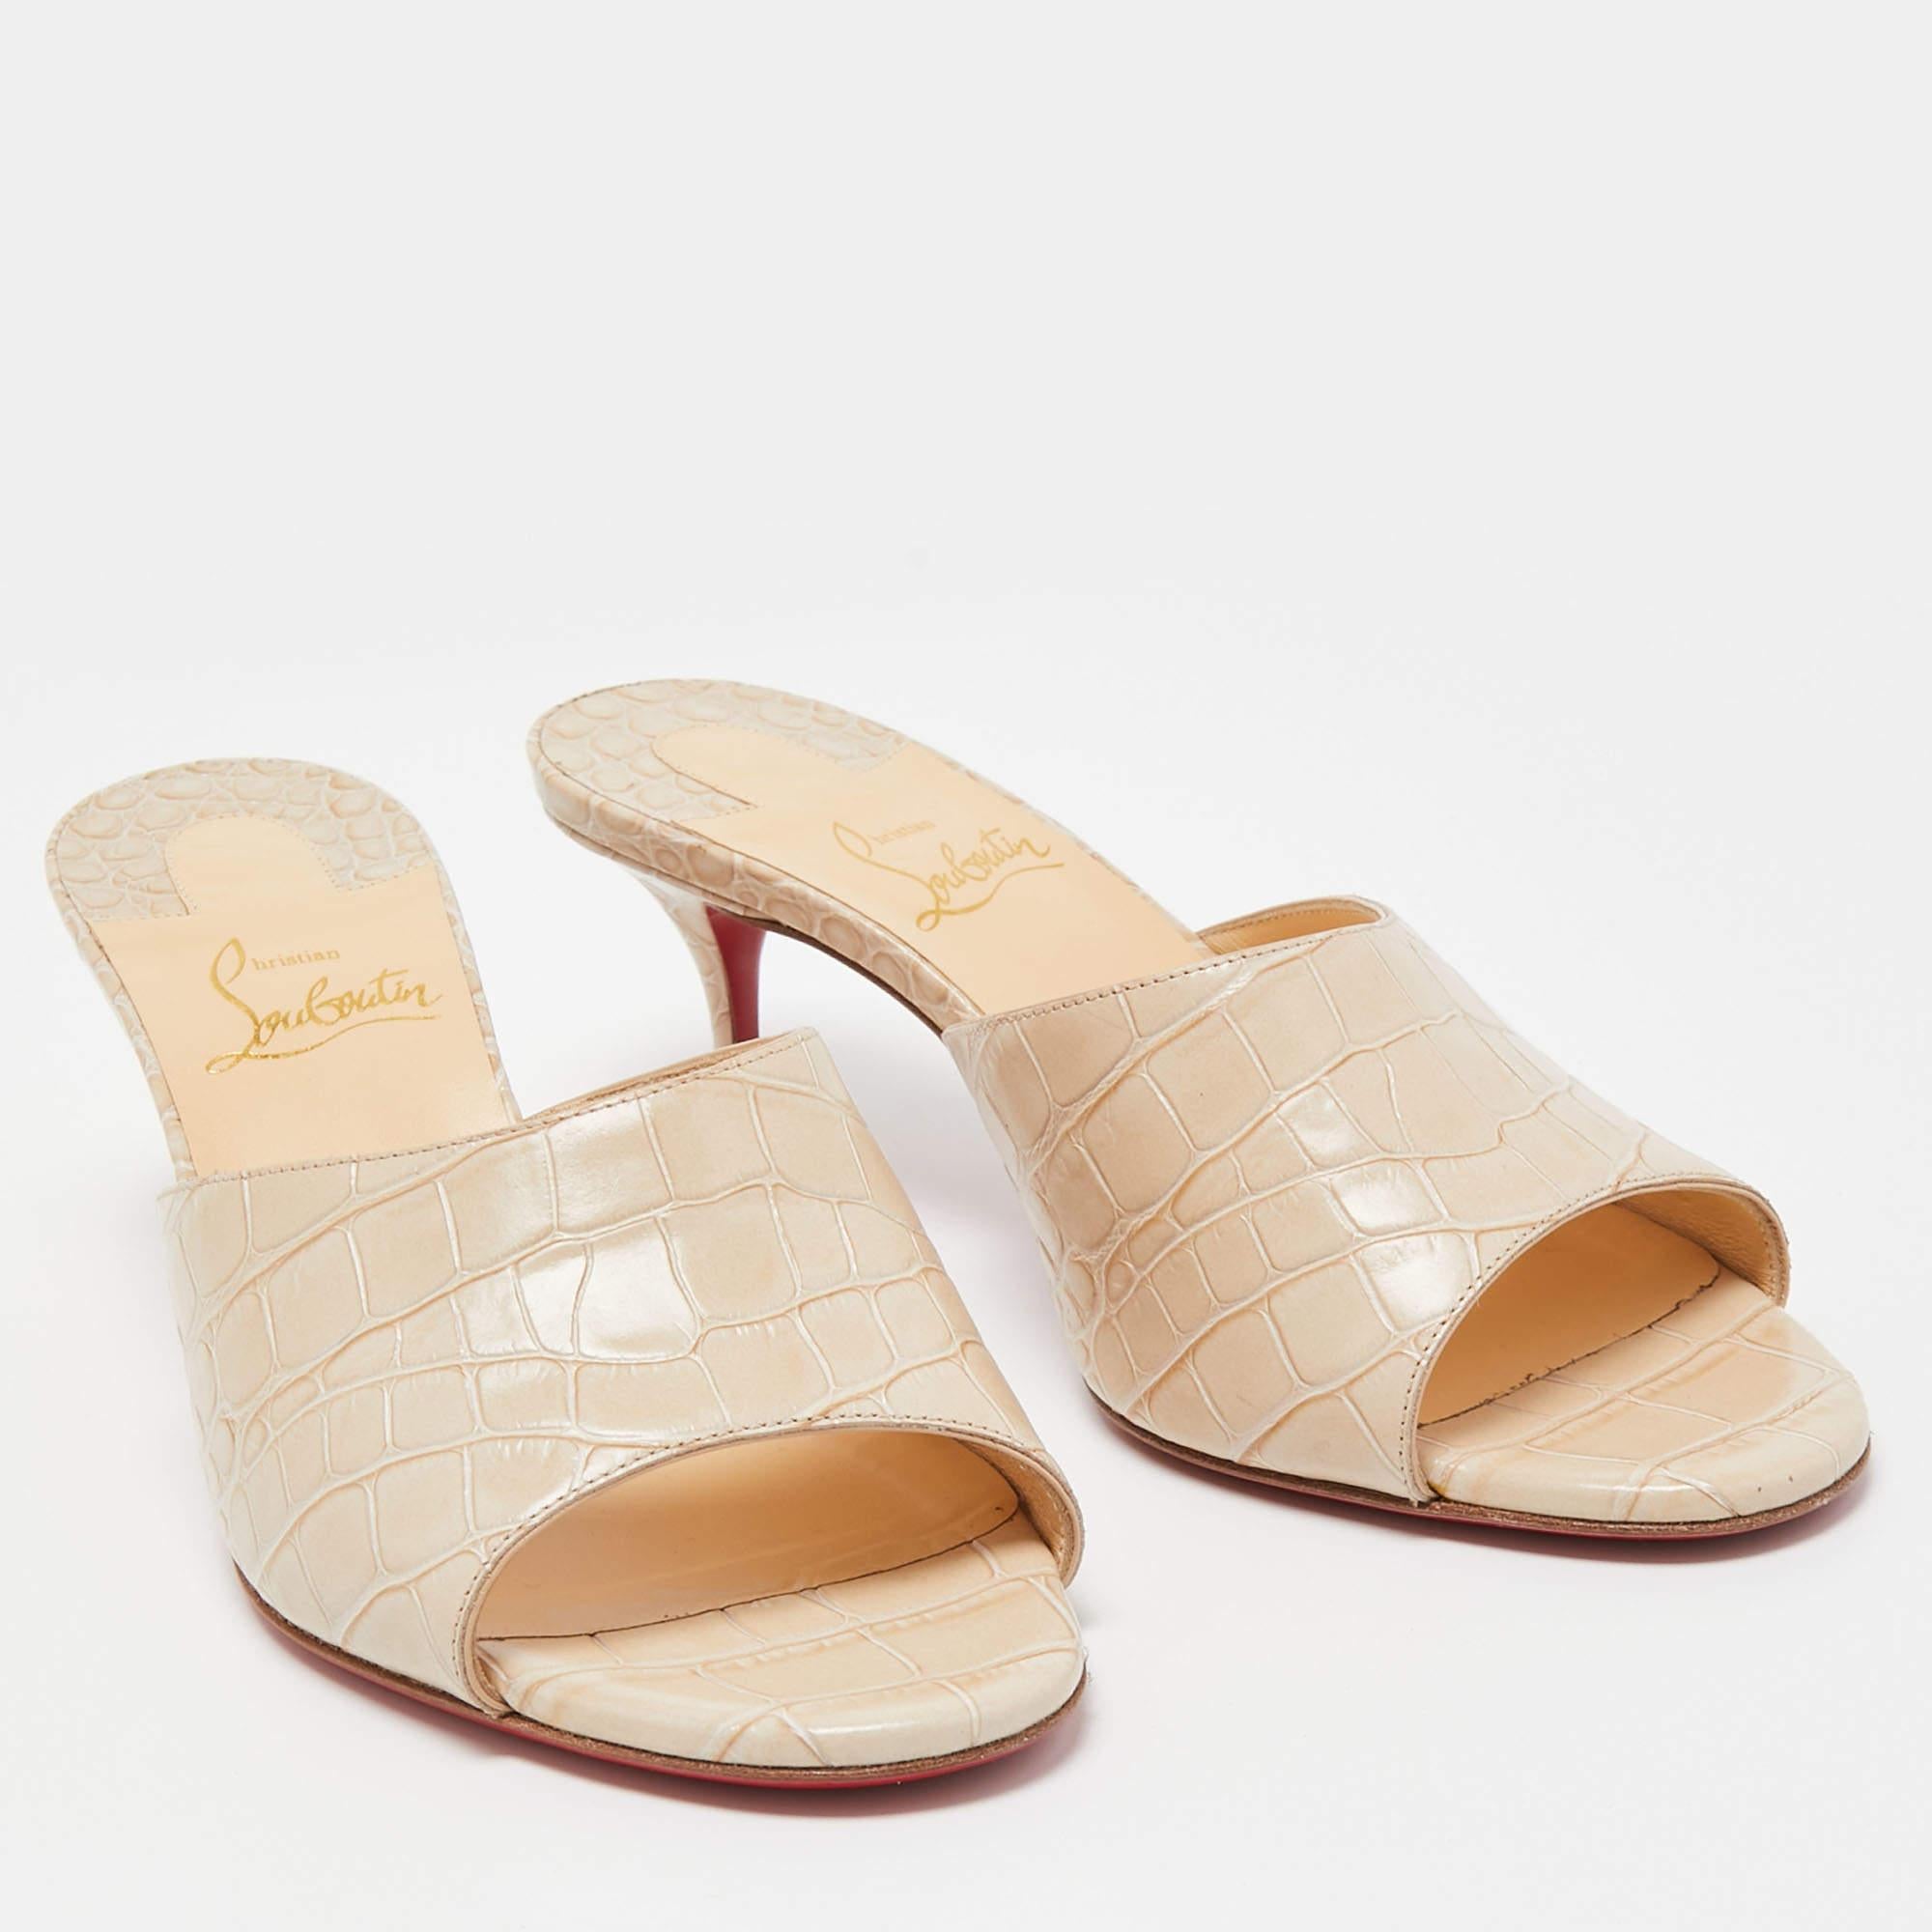 Perfectly sewn and finished to ensure an elegant look and fit, these Christian Louboutin slide sandals are a purchase you'll love flaunting. They look great on the feet.

